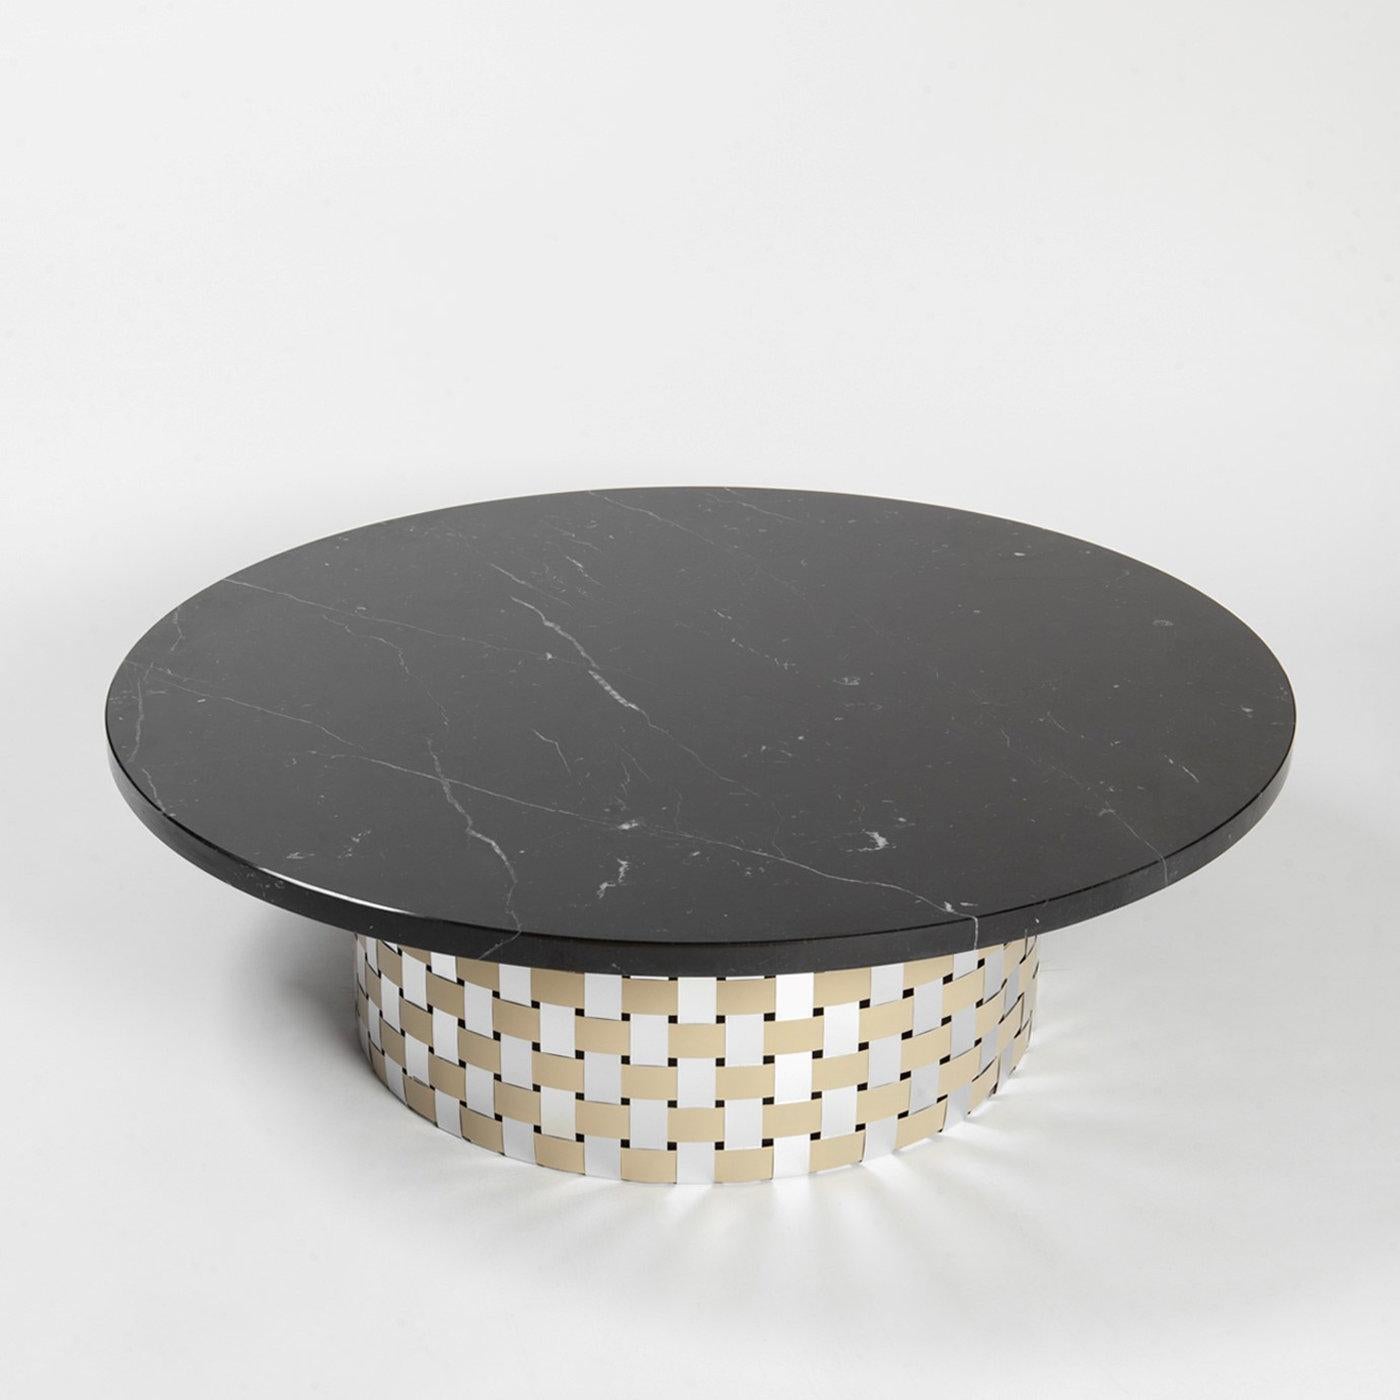 Named after Hecate, the ancient Greek goddess of the waning moon, this round coffee table will make a stately statement in any decor. The cylindrical base equipped with tiny wheels is composed of recycled foils of natural-finished and golden